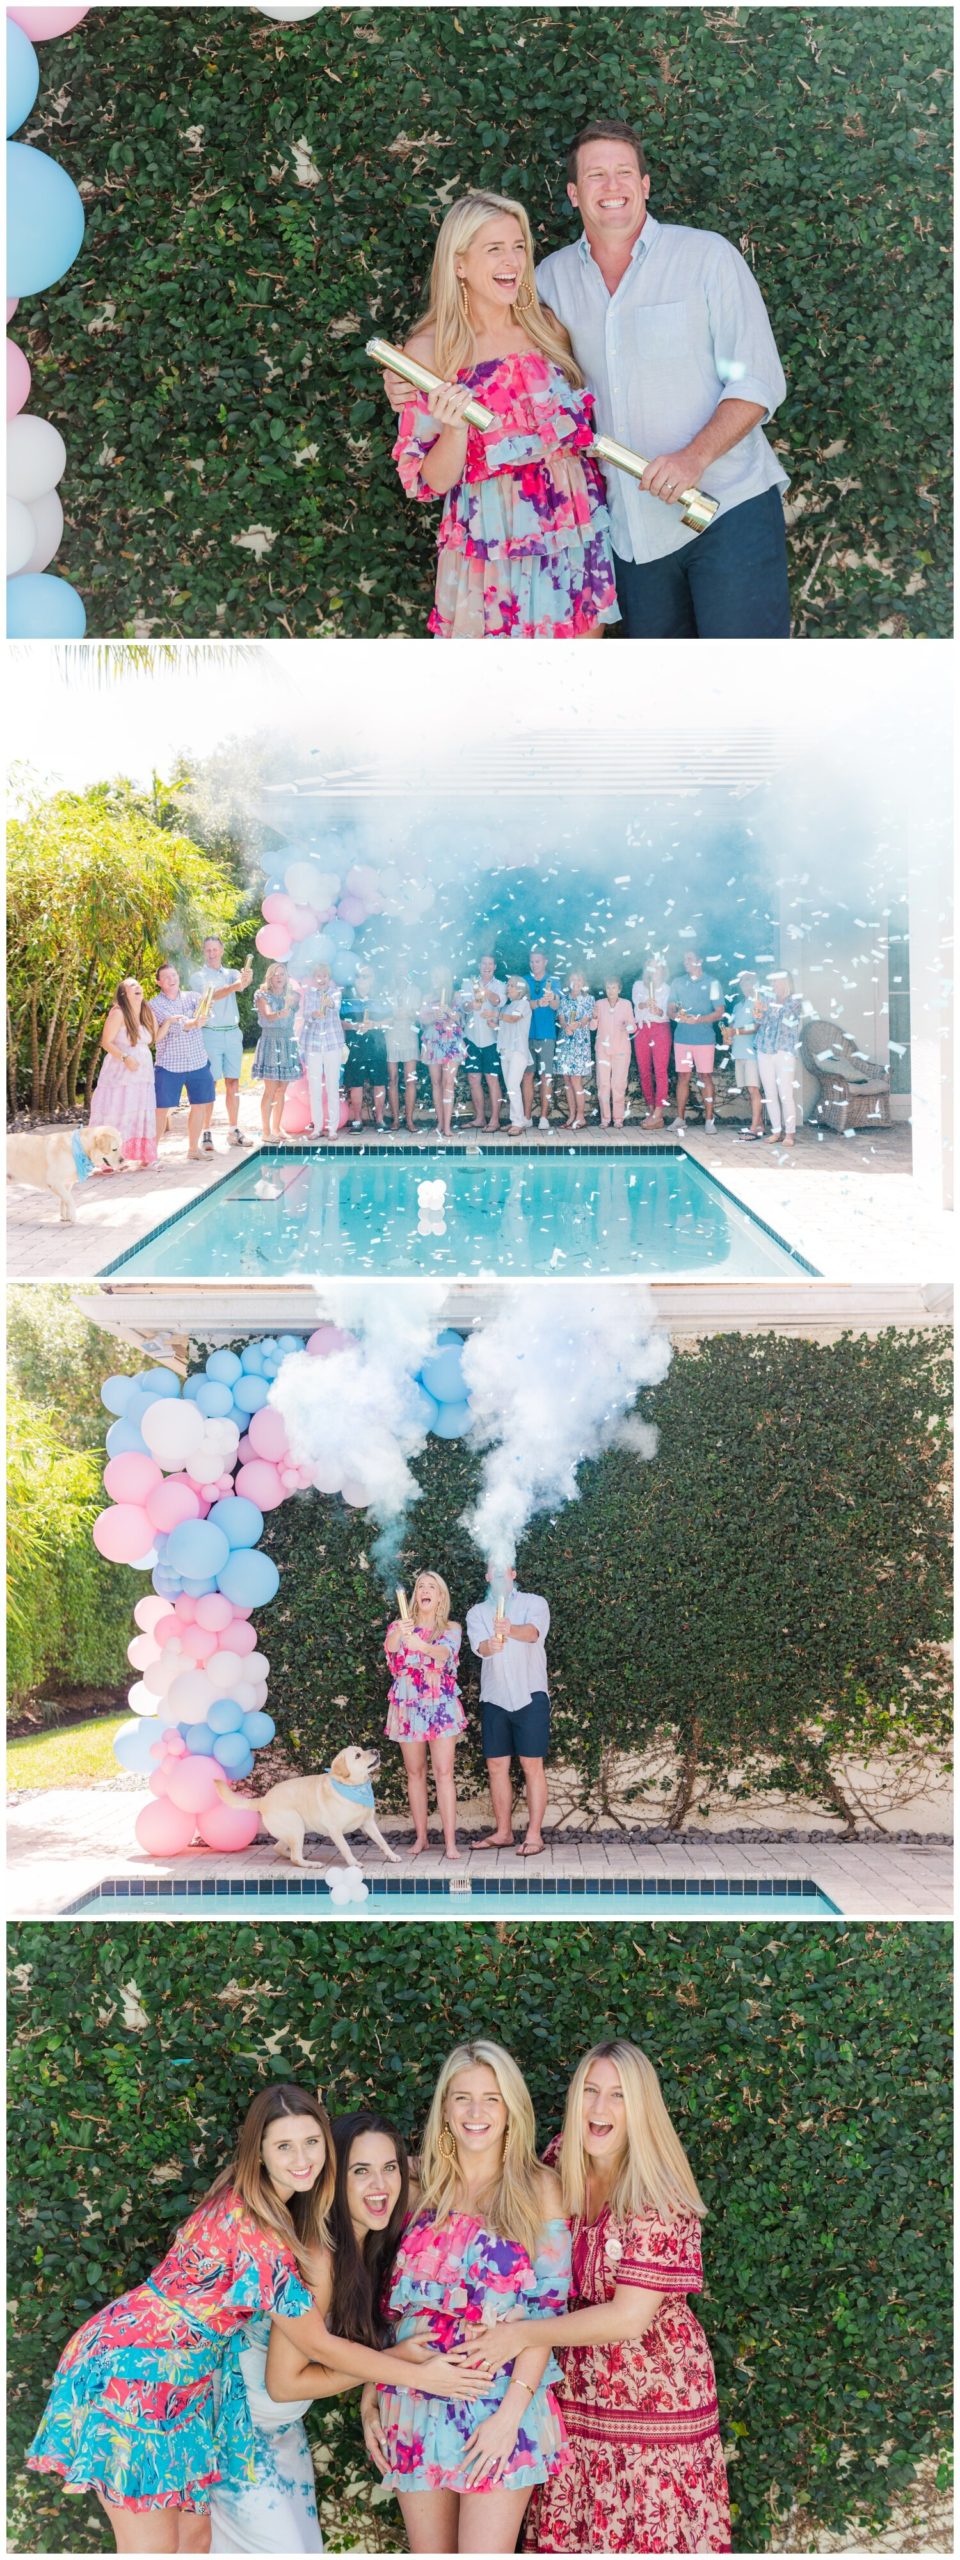 CMageePhotography_GenderReveal_Tequesta_0005.jpg